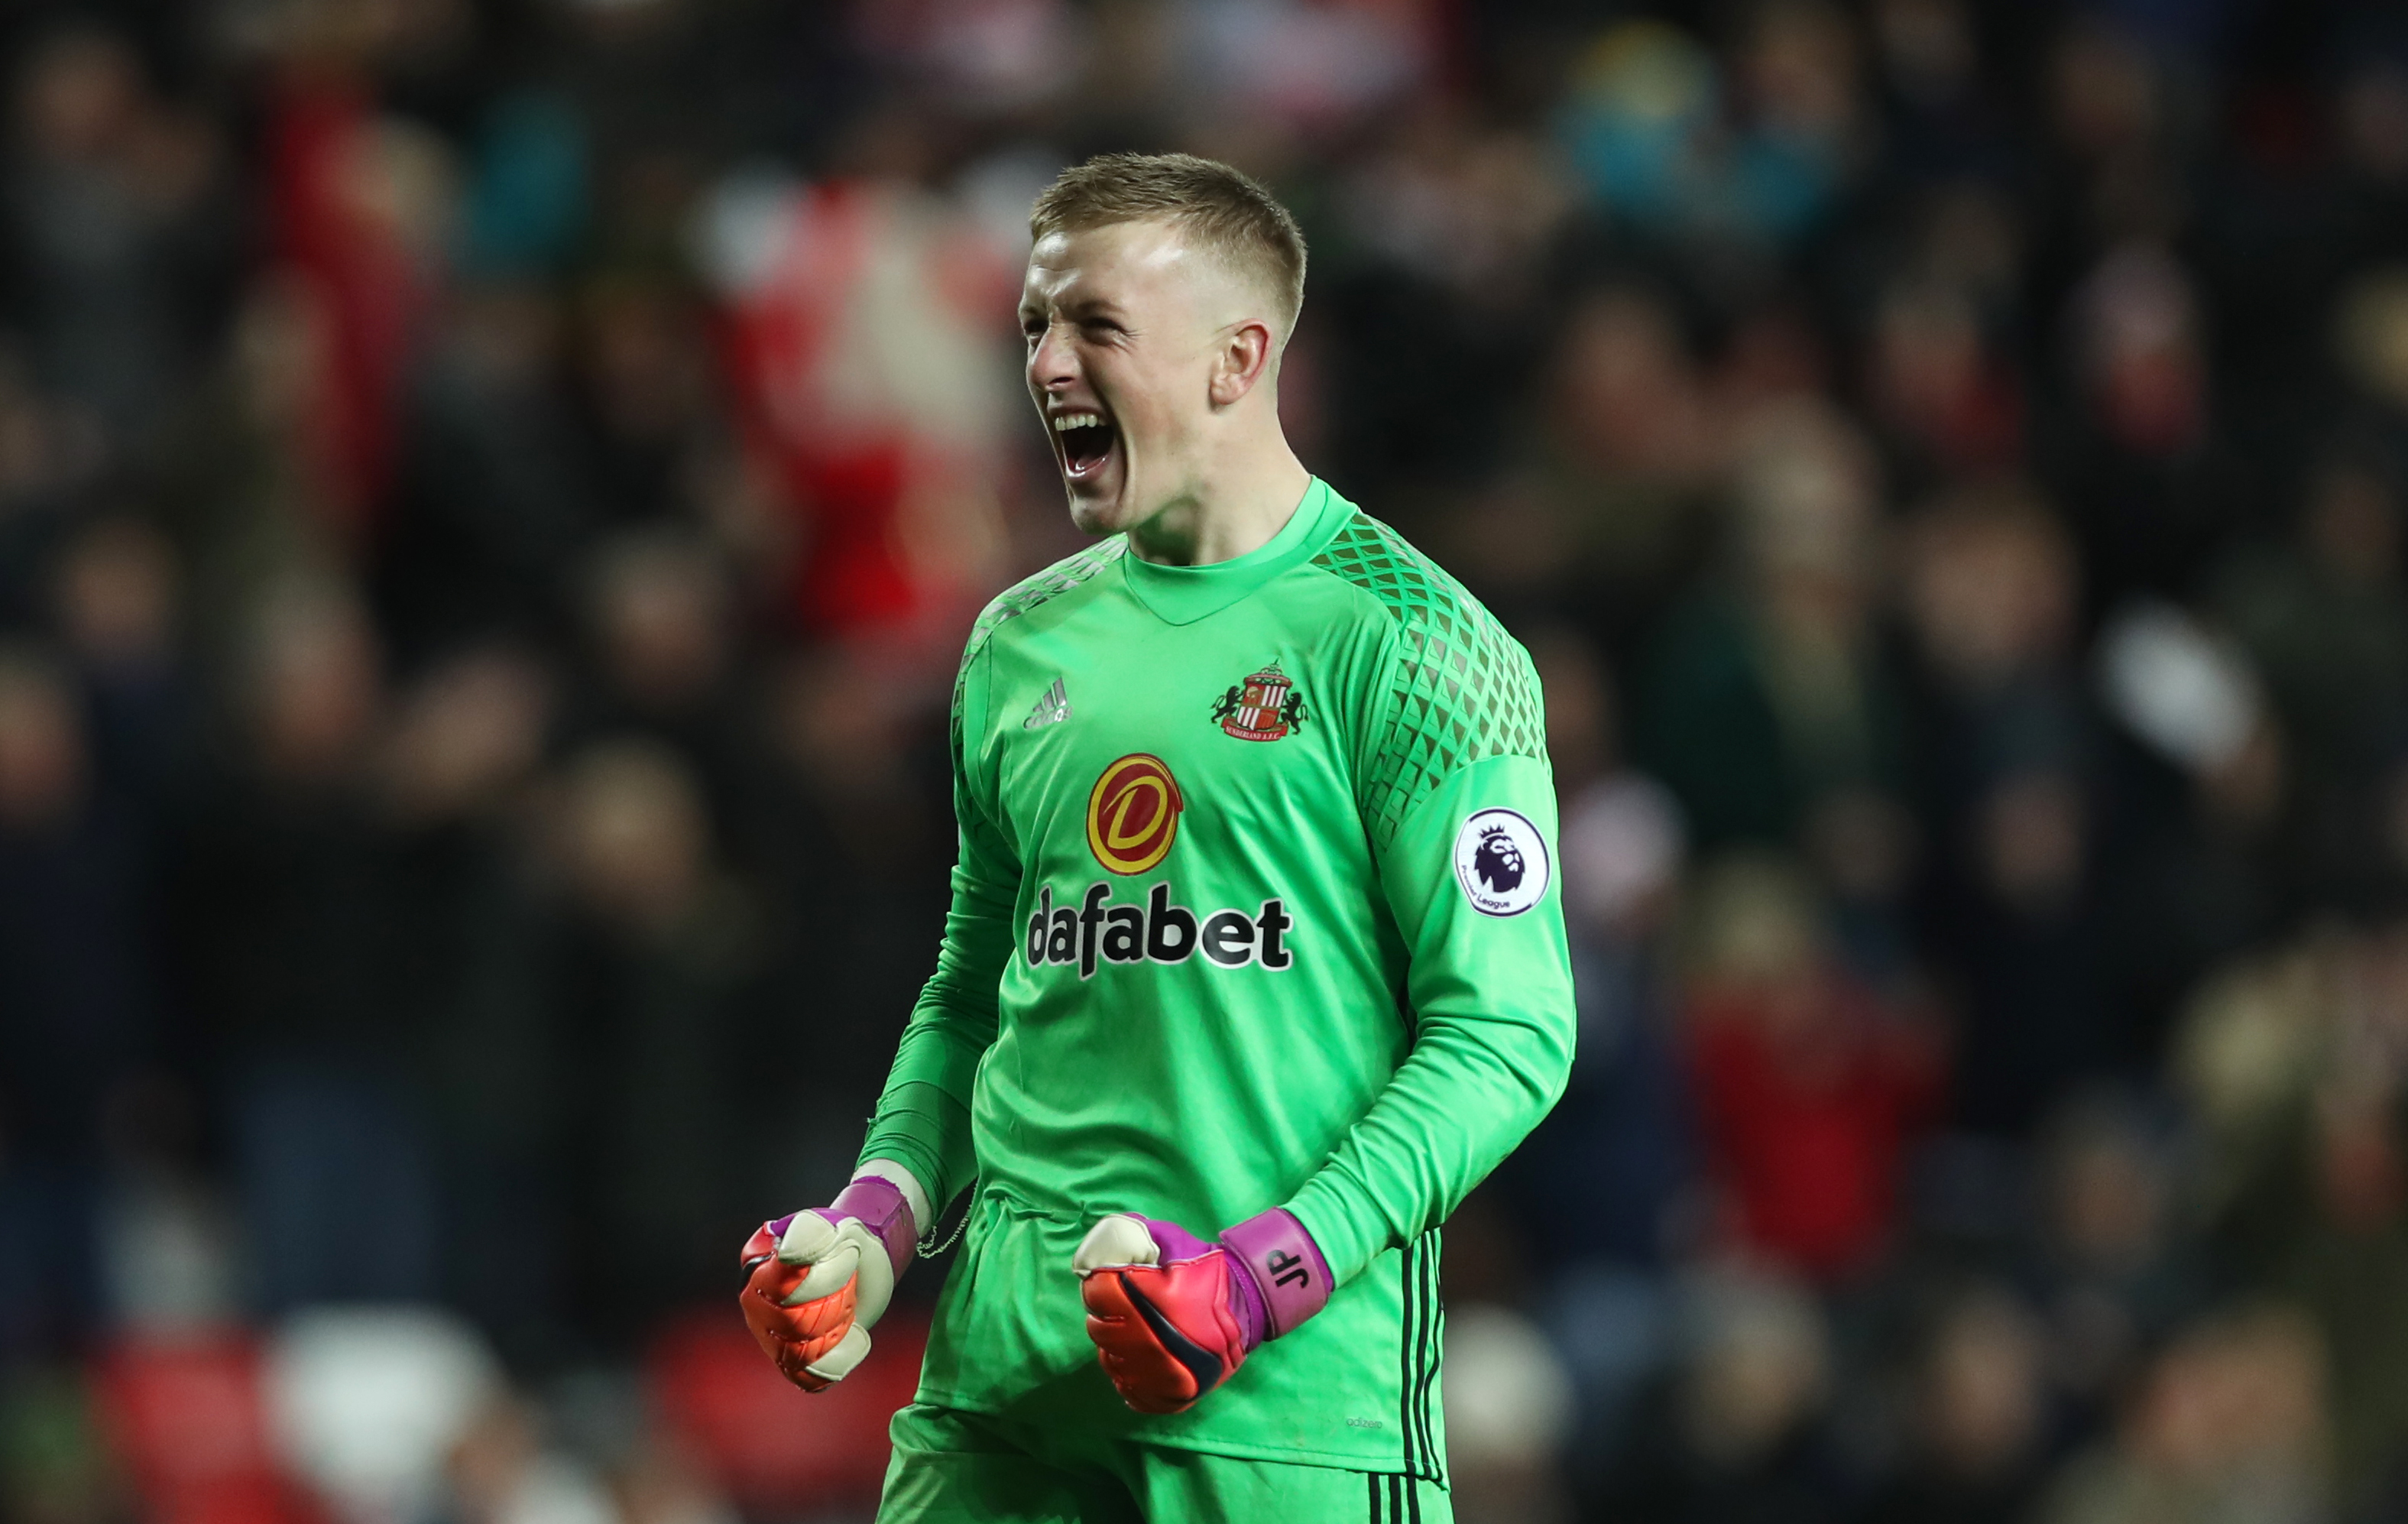 SUNDERLAND, ENGLAND - DECEMBER 17: Jordan Pickford of Sunderland reacts at the final whistle during the Premier League match between Sunderland and Watford at Stadium of Light on December 17, 2016 in Sunderland, England. (Photo by Ian MacNicol/Getty Images)